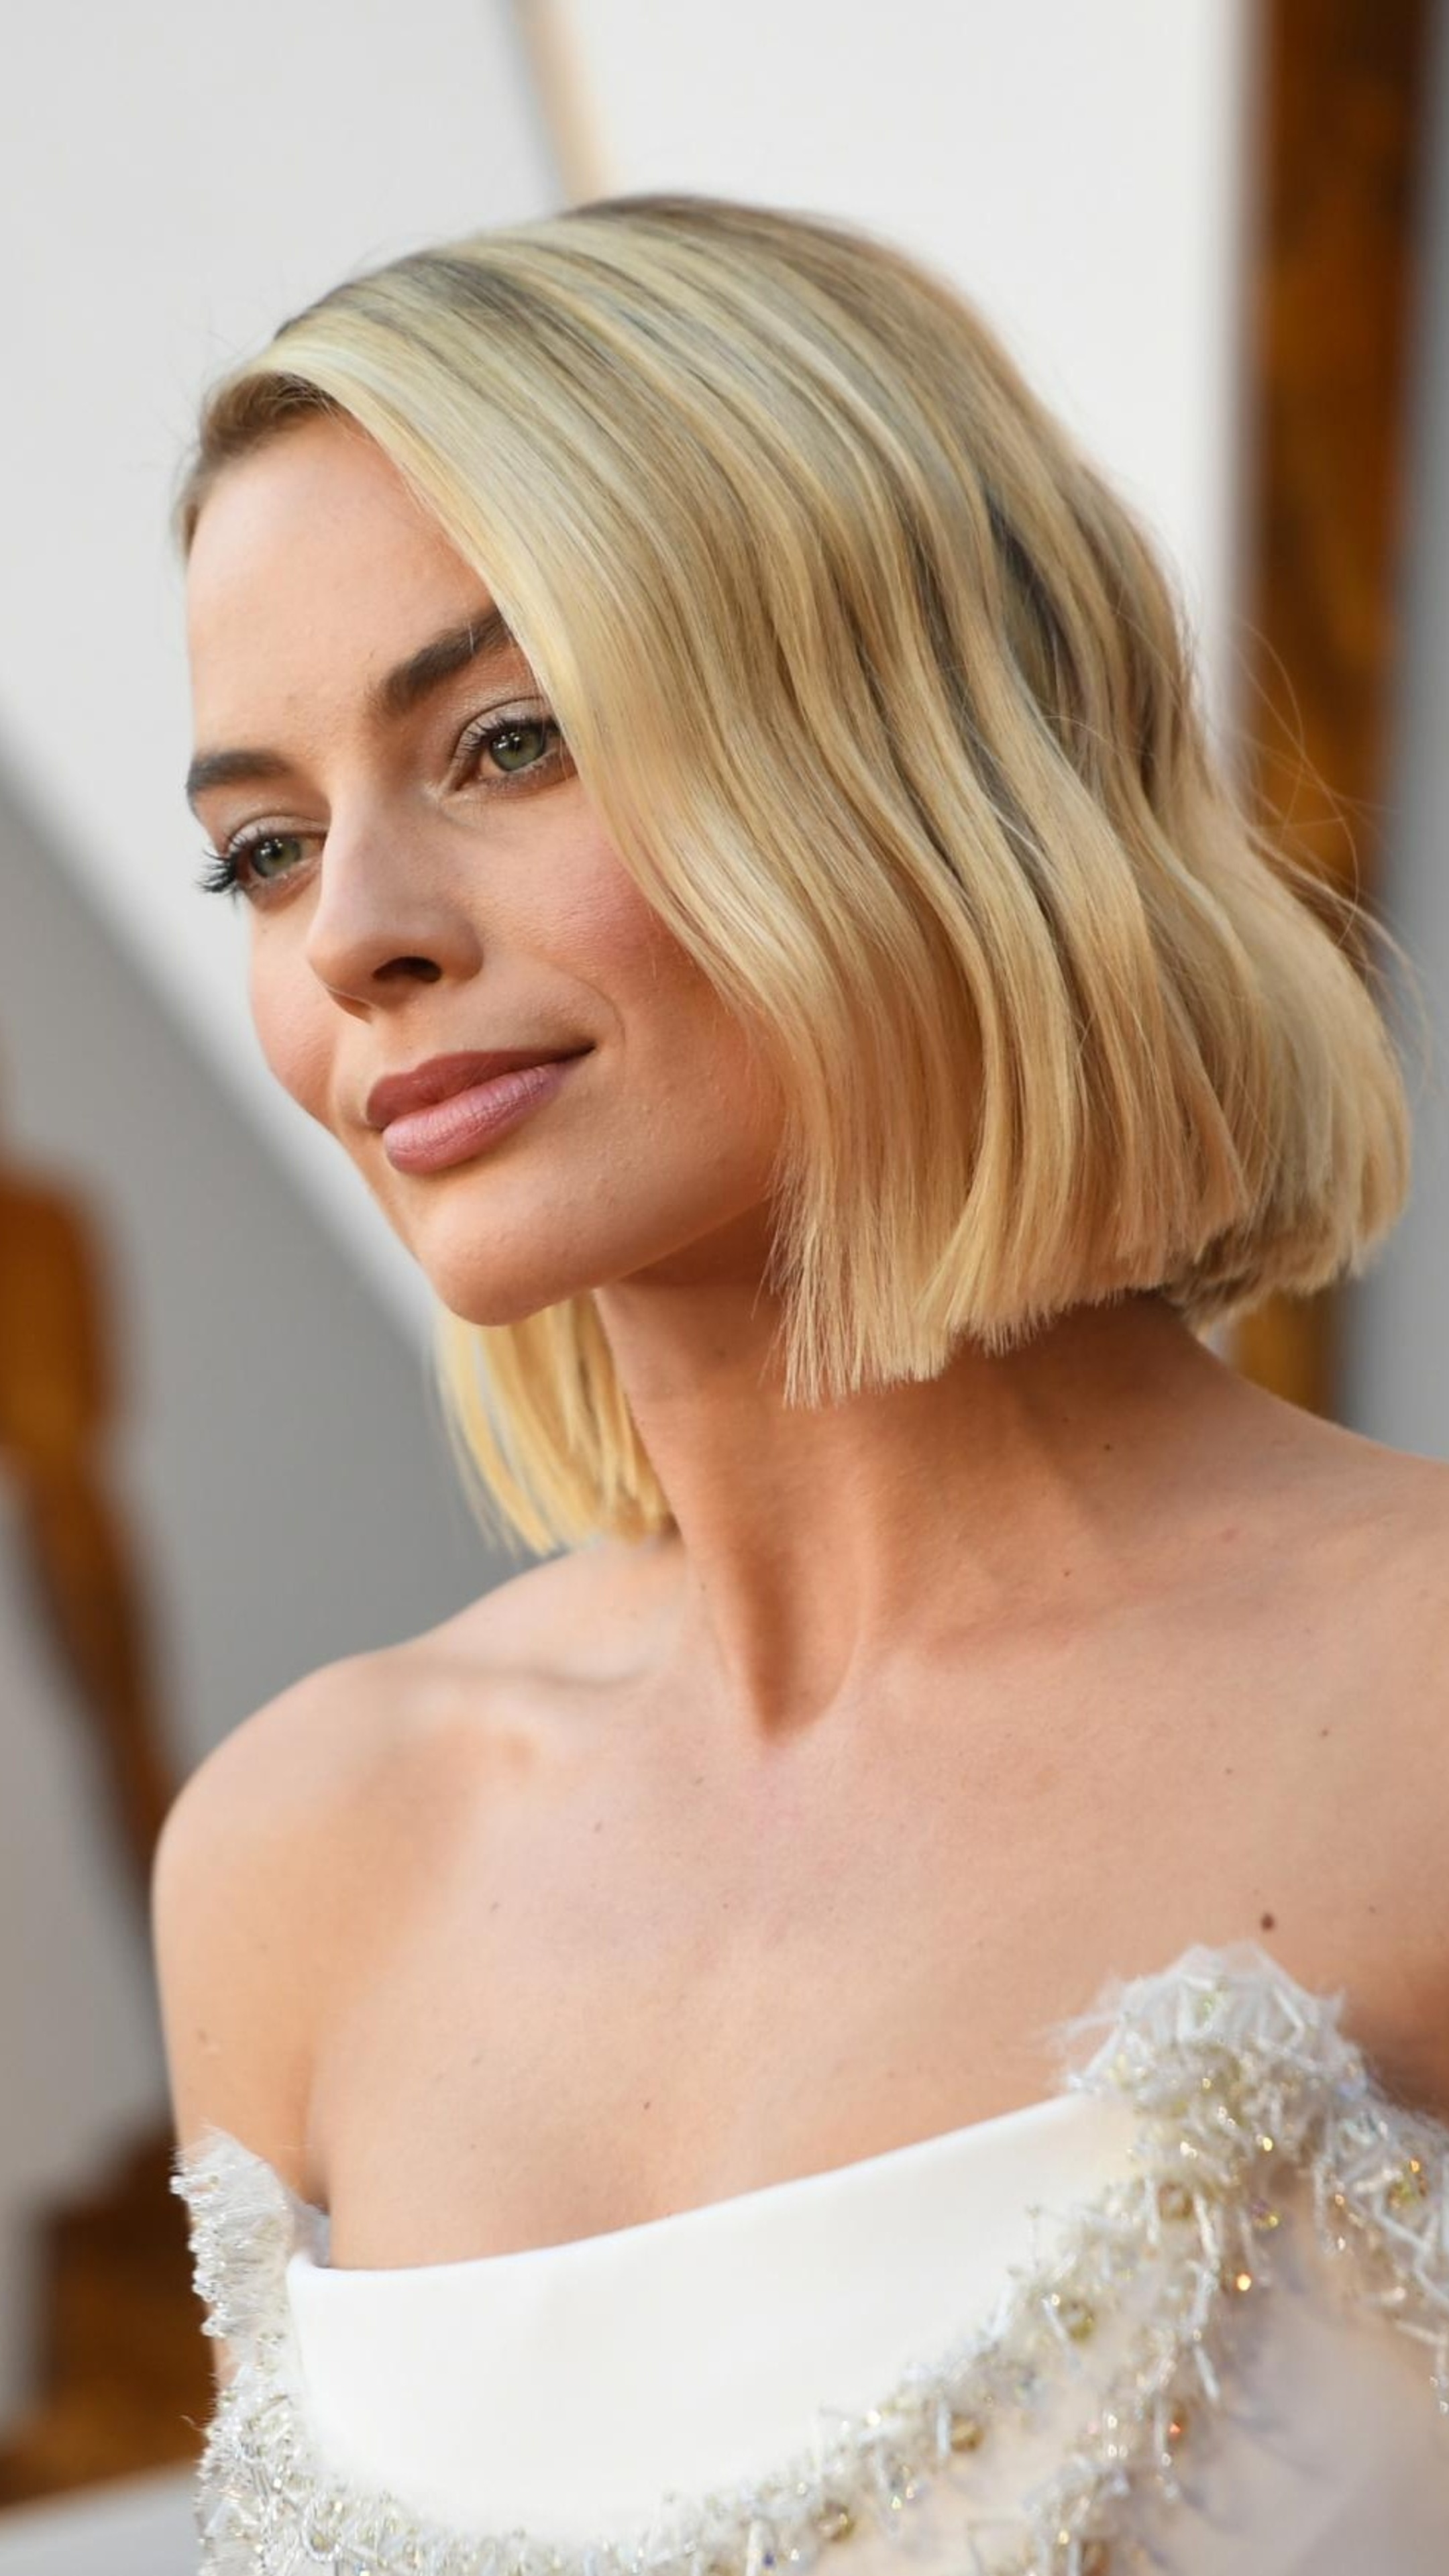 Margot Robbie at Oscars, 4K wallpaper, Hollywood beauty, Red carpet glamour, 2160x3840 4K Phone